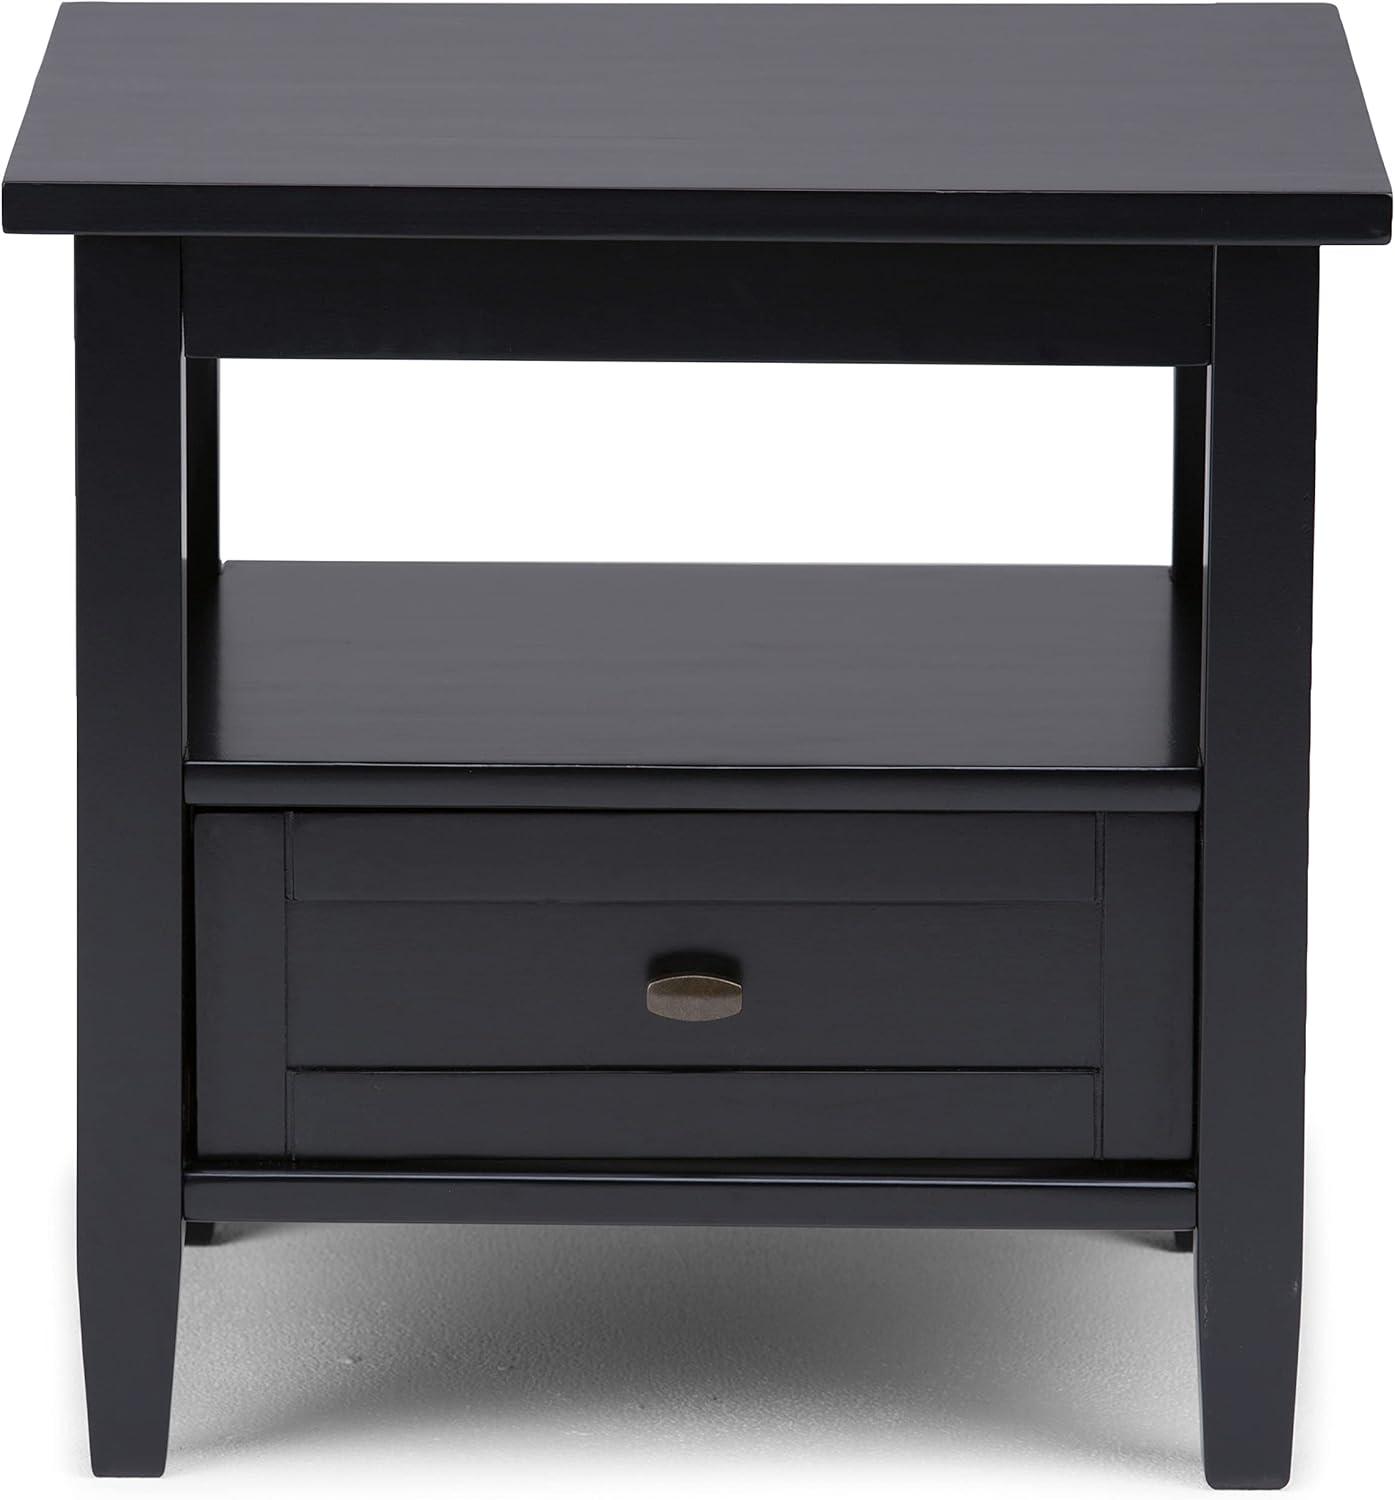 Warm Shaker 20" Black Solid Wood End Table with Storage